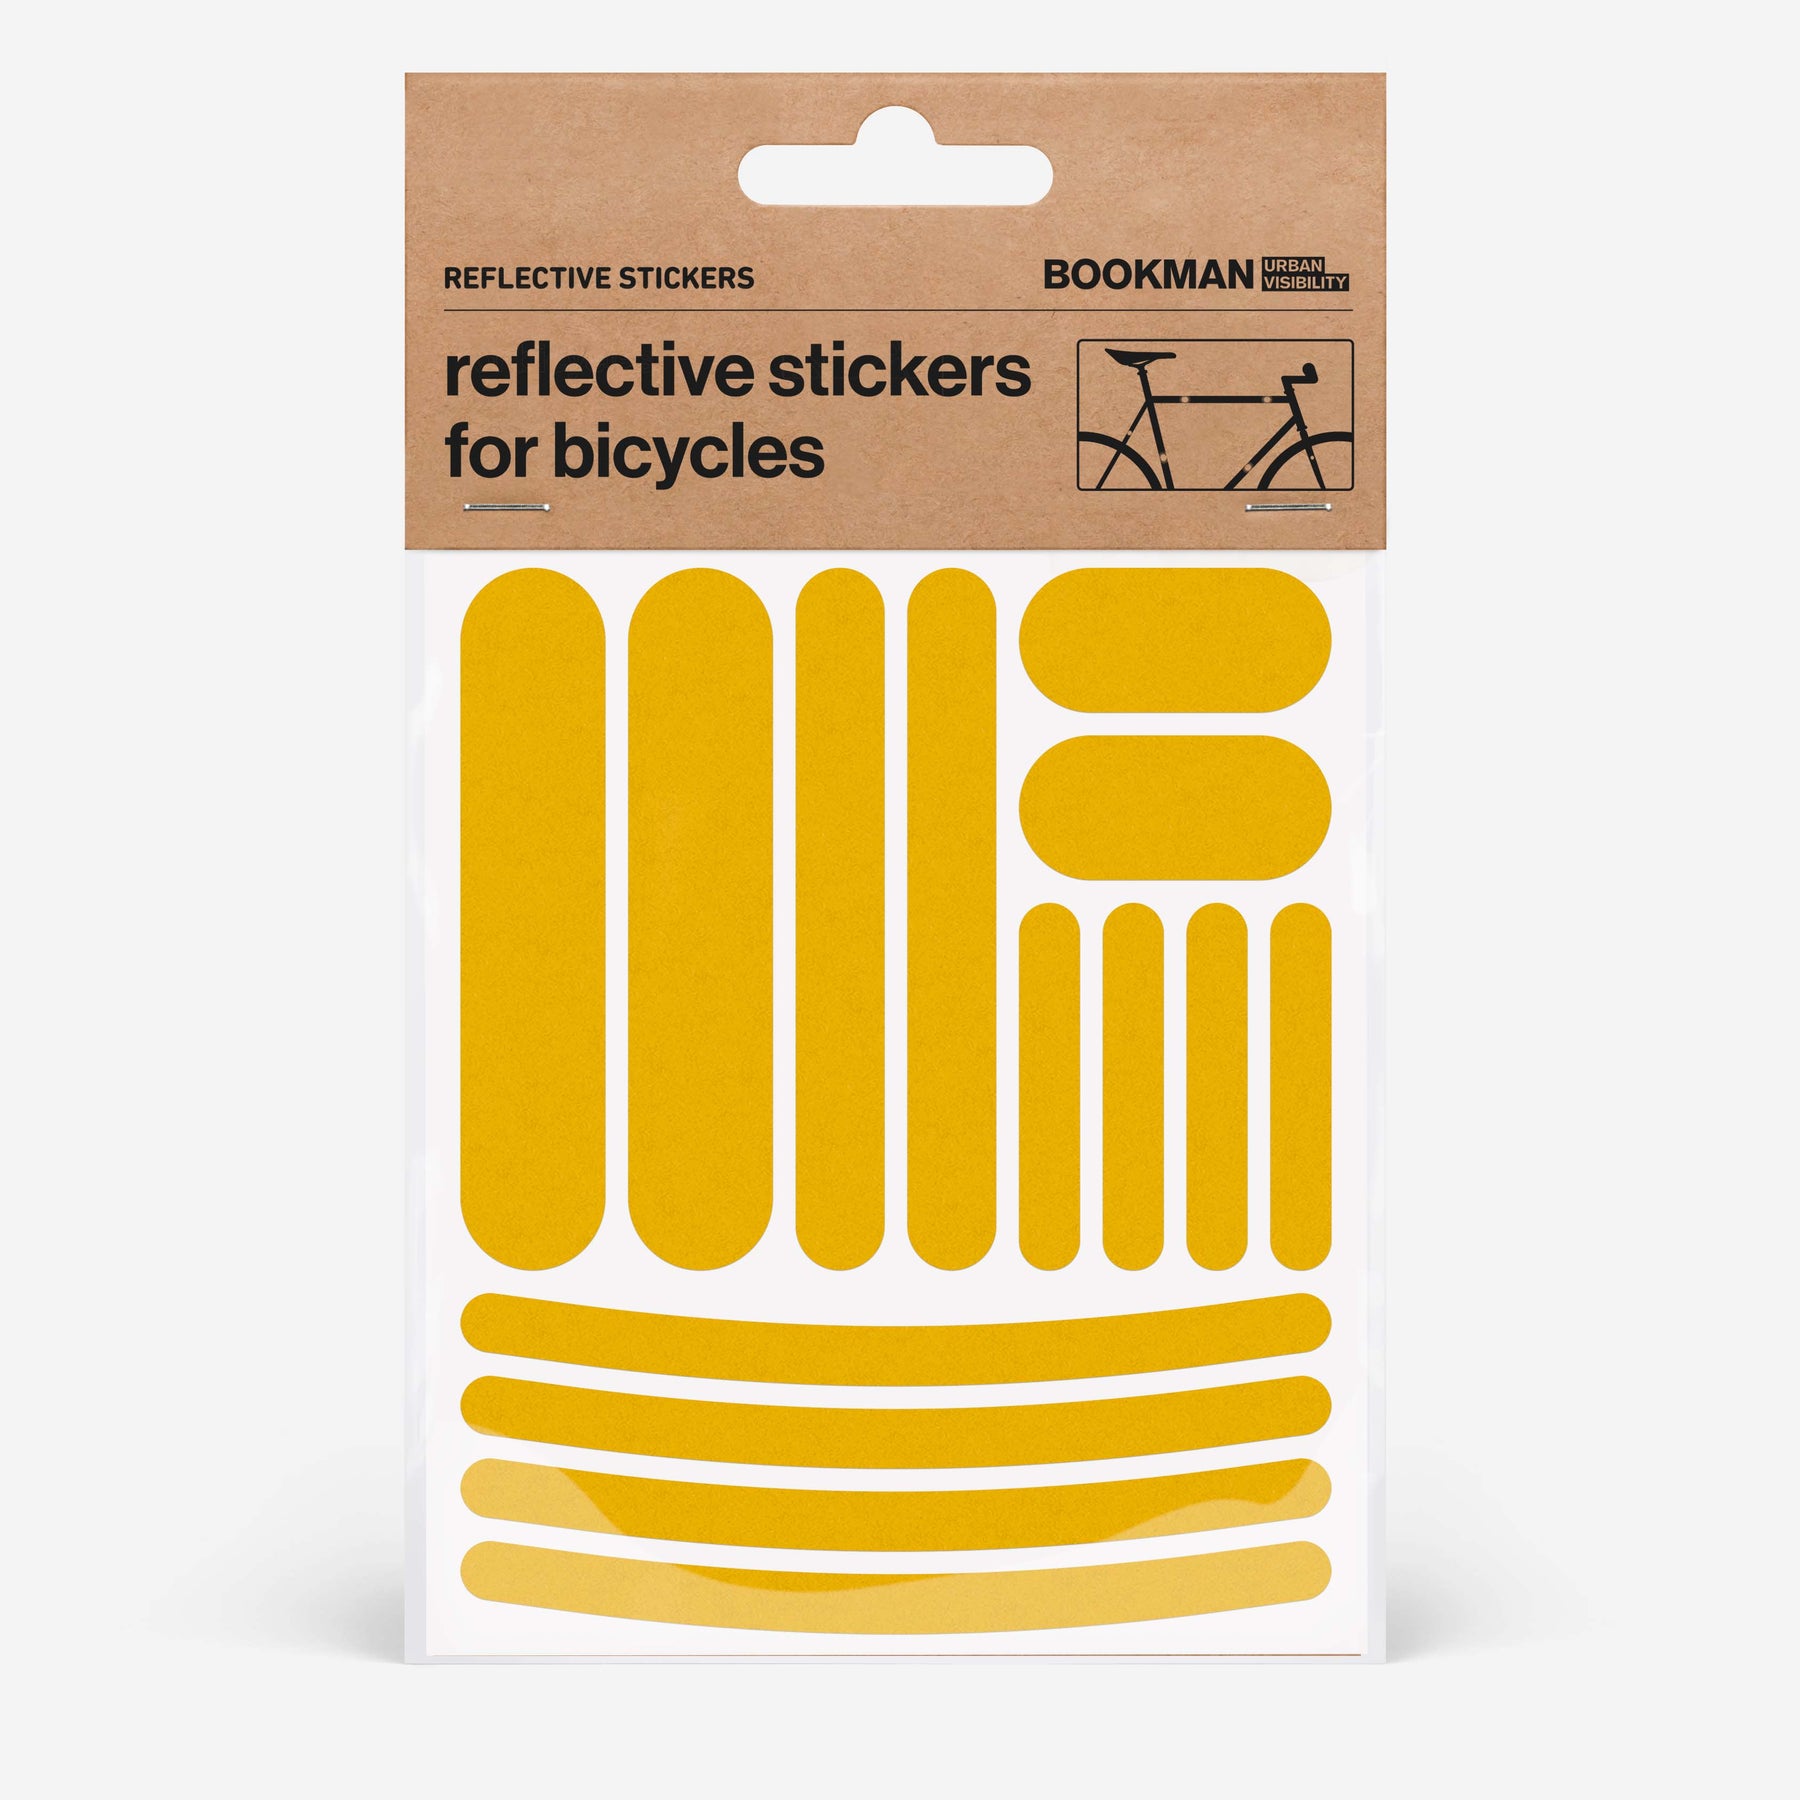 ReflecToes Reflective Stickers for Hard Surfaces - Bicycle Frame, Helmet, Stroller, Scooter, Pedals - 5 Pack - 3.5 x 5.5 Inches per Sheet - 150 Bright